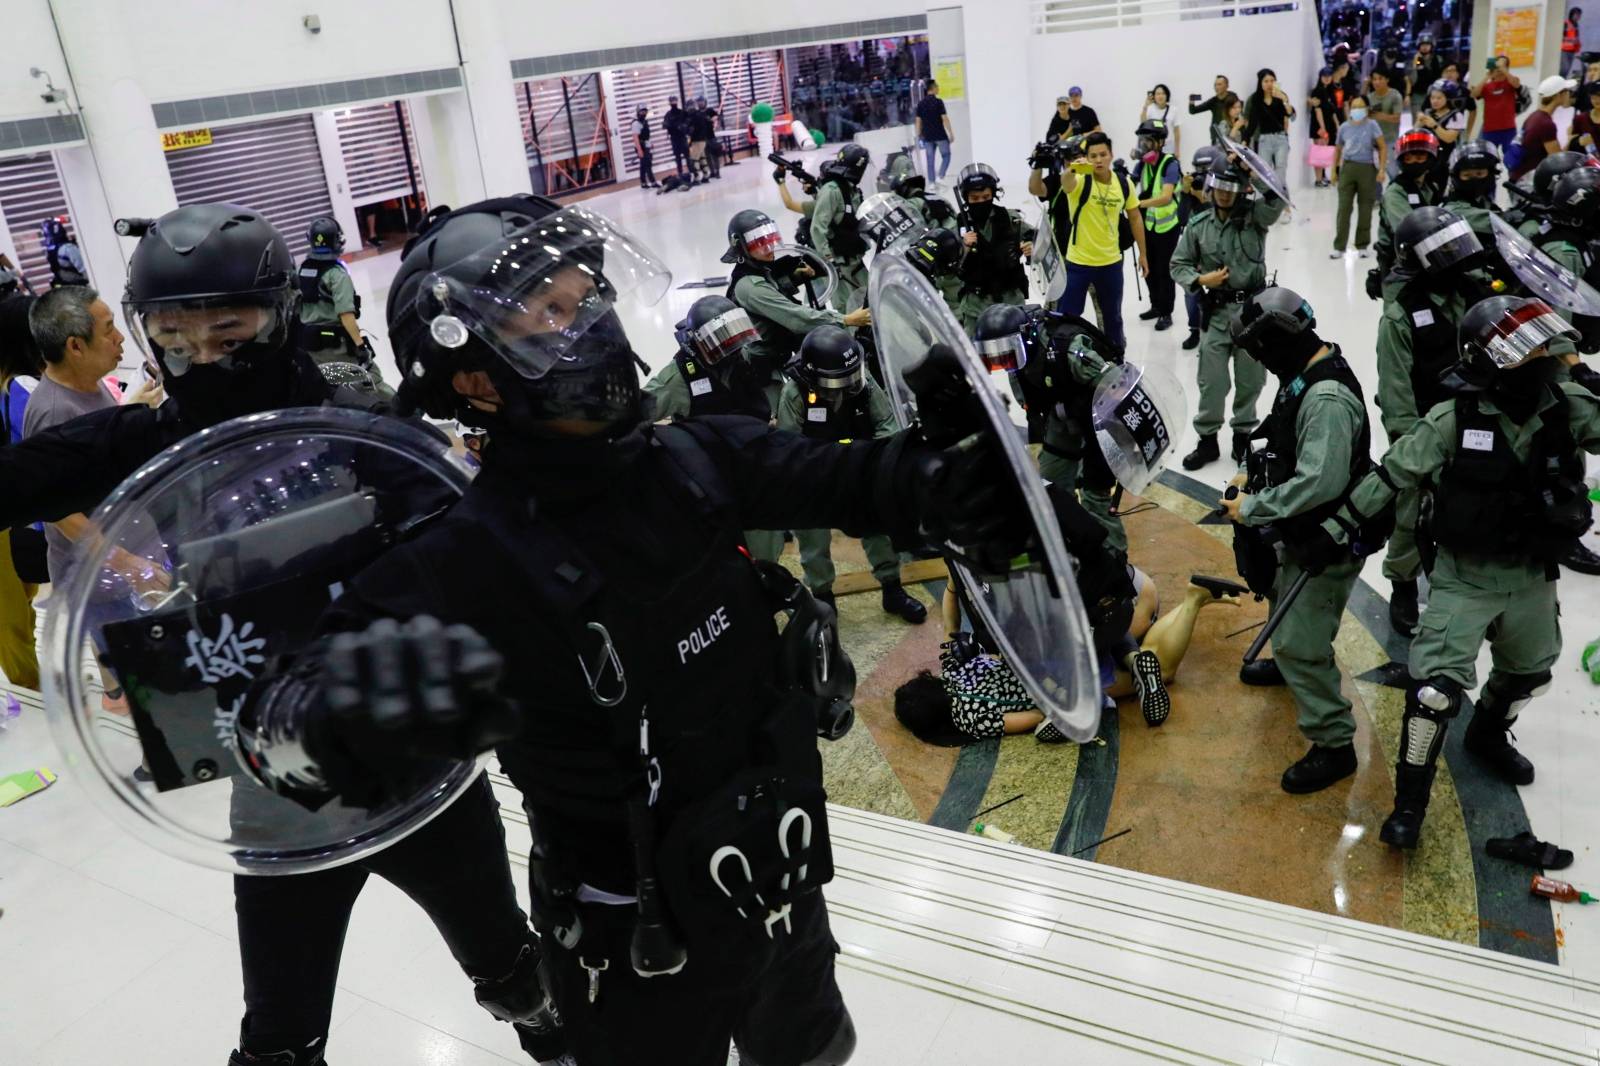 Riot police detain an anti-government protester at a shopping mall in Tai Po, Hong Kong